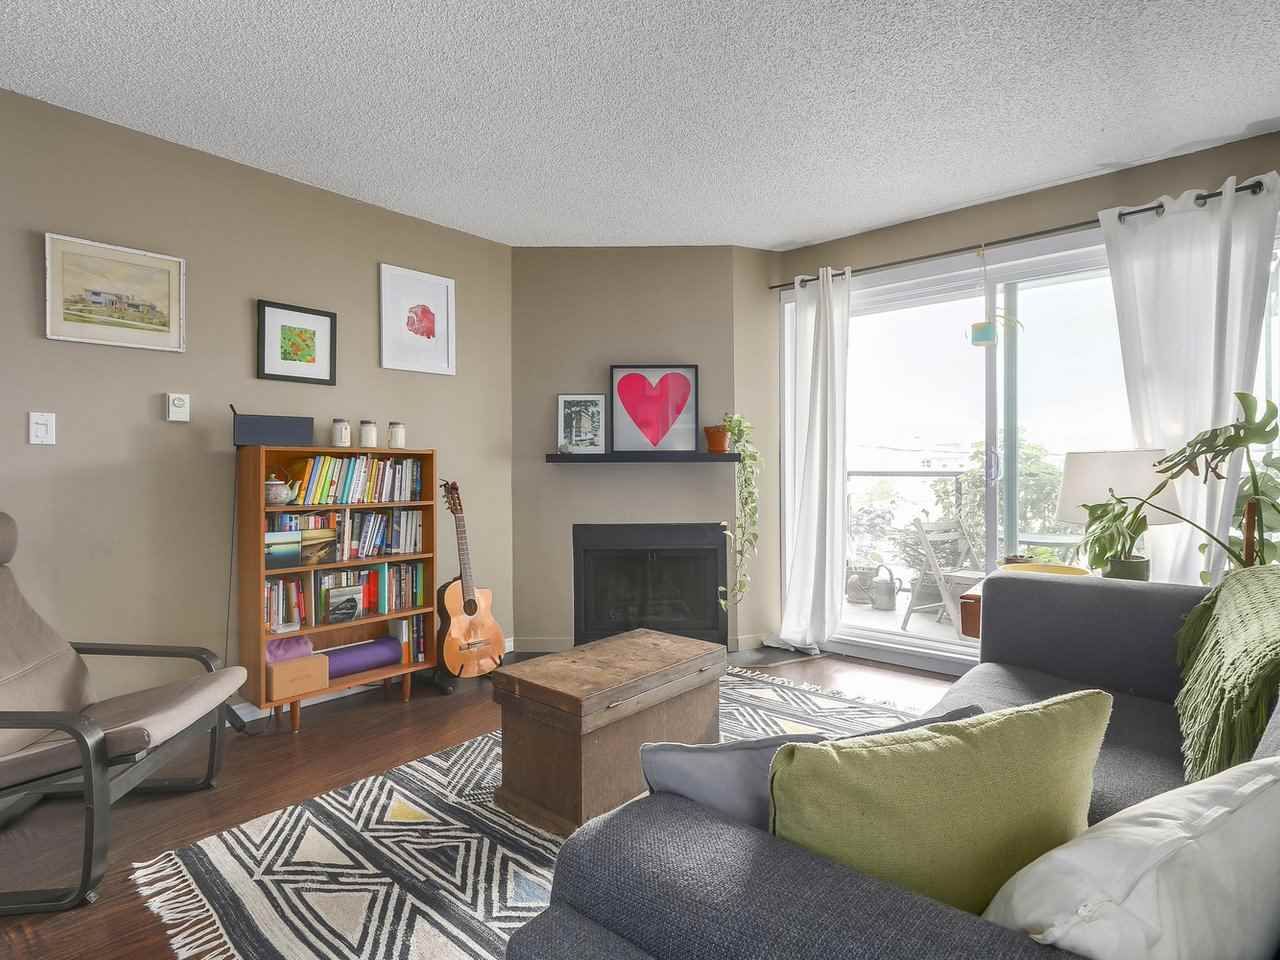 Main Photo: 202 111 W 10TH Avenue in Vancouver: Mount Pleasant VW Condo for sale (Vancouver West)  : MLS®# R2208429